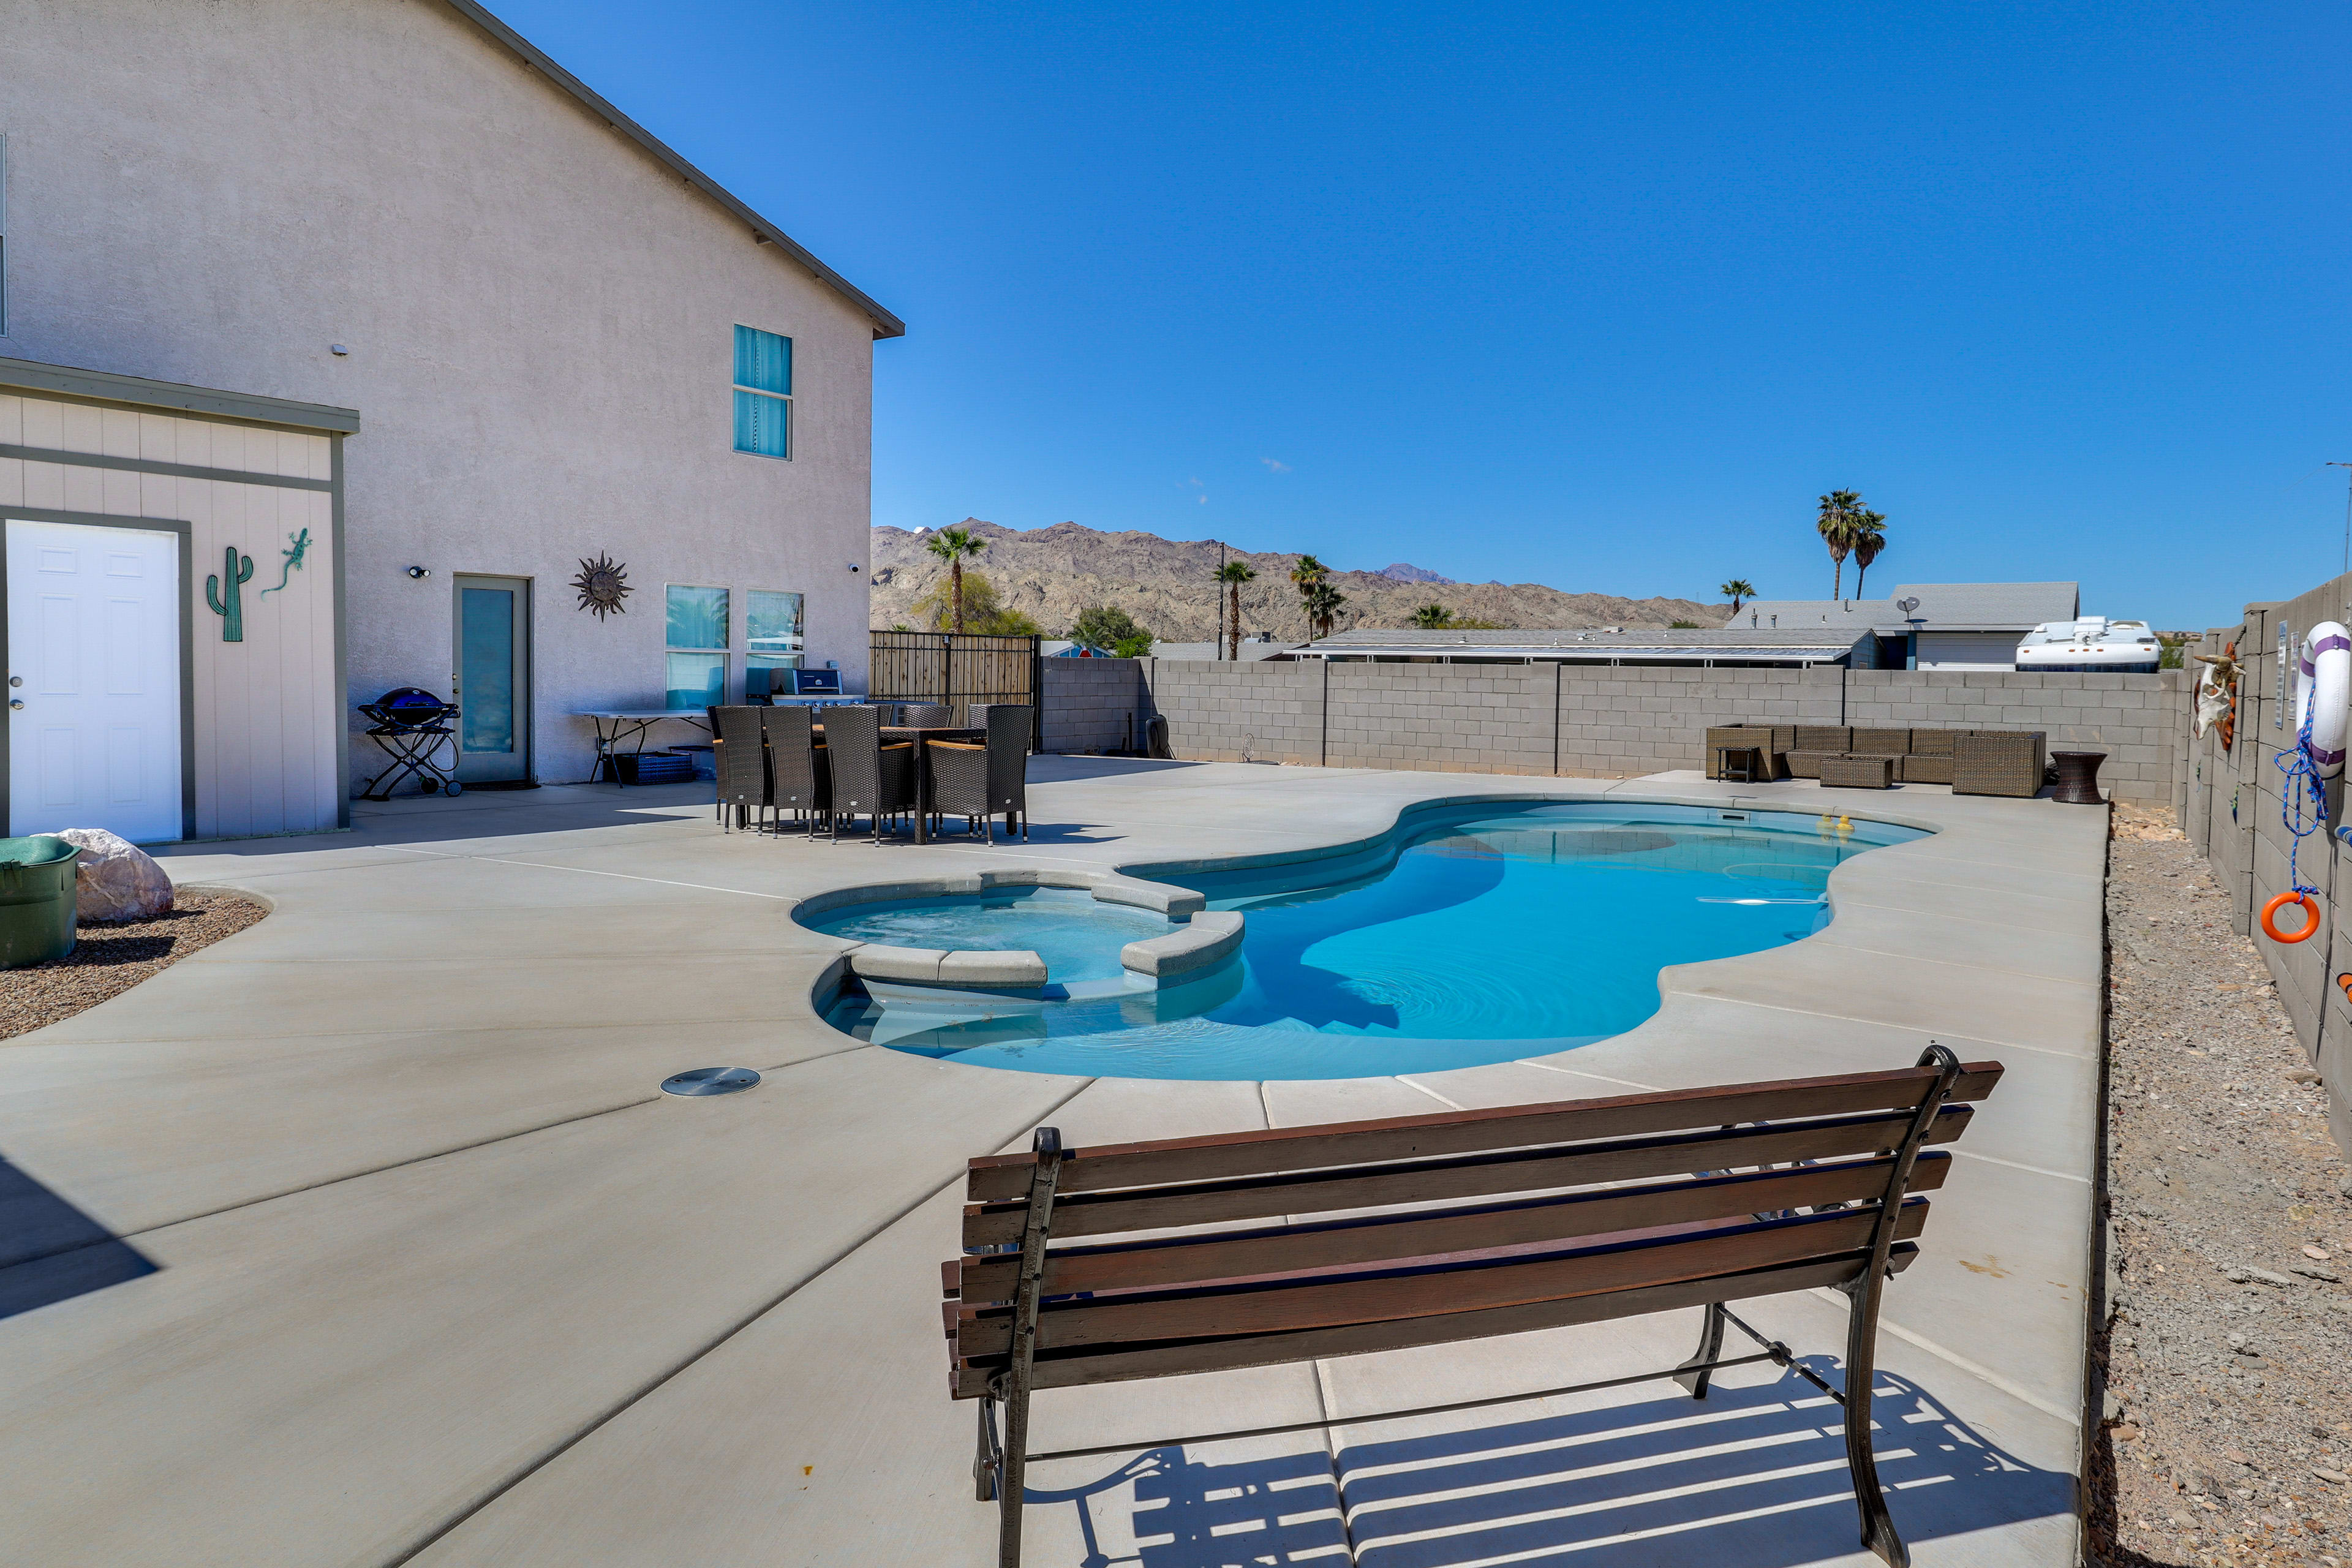 Bullhead City Vacation Rental | 5BR | 2.5BA | 2,009 Sq Ft | Stairs Required